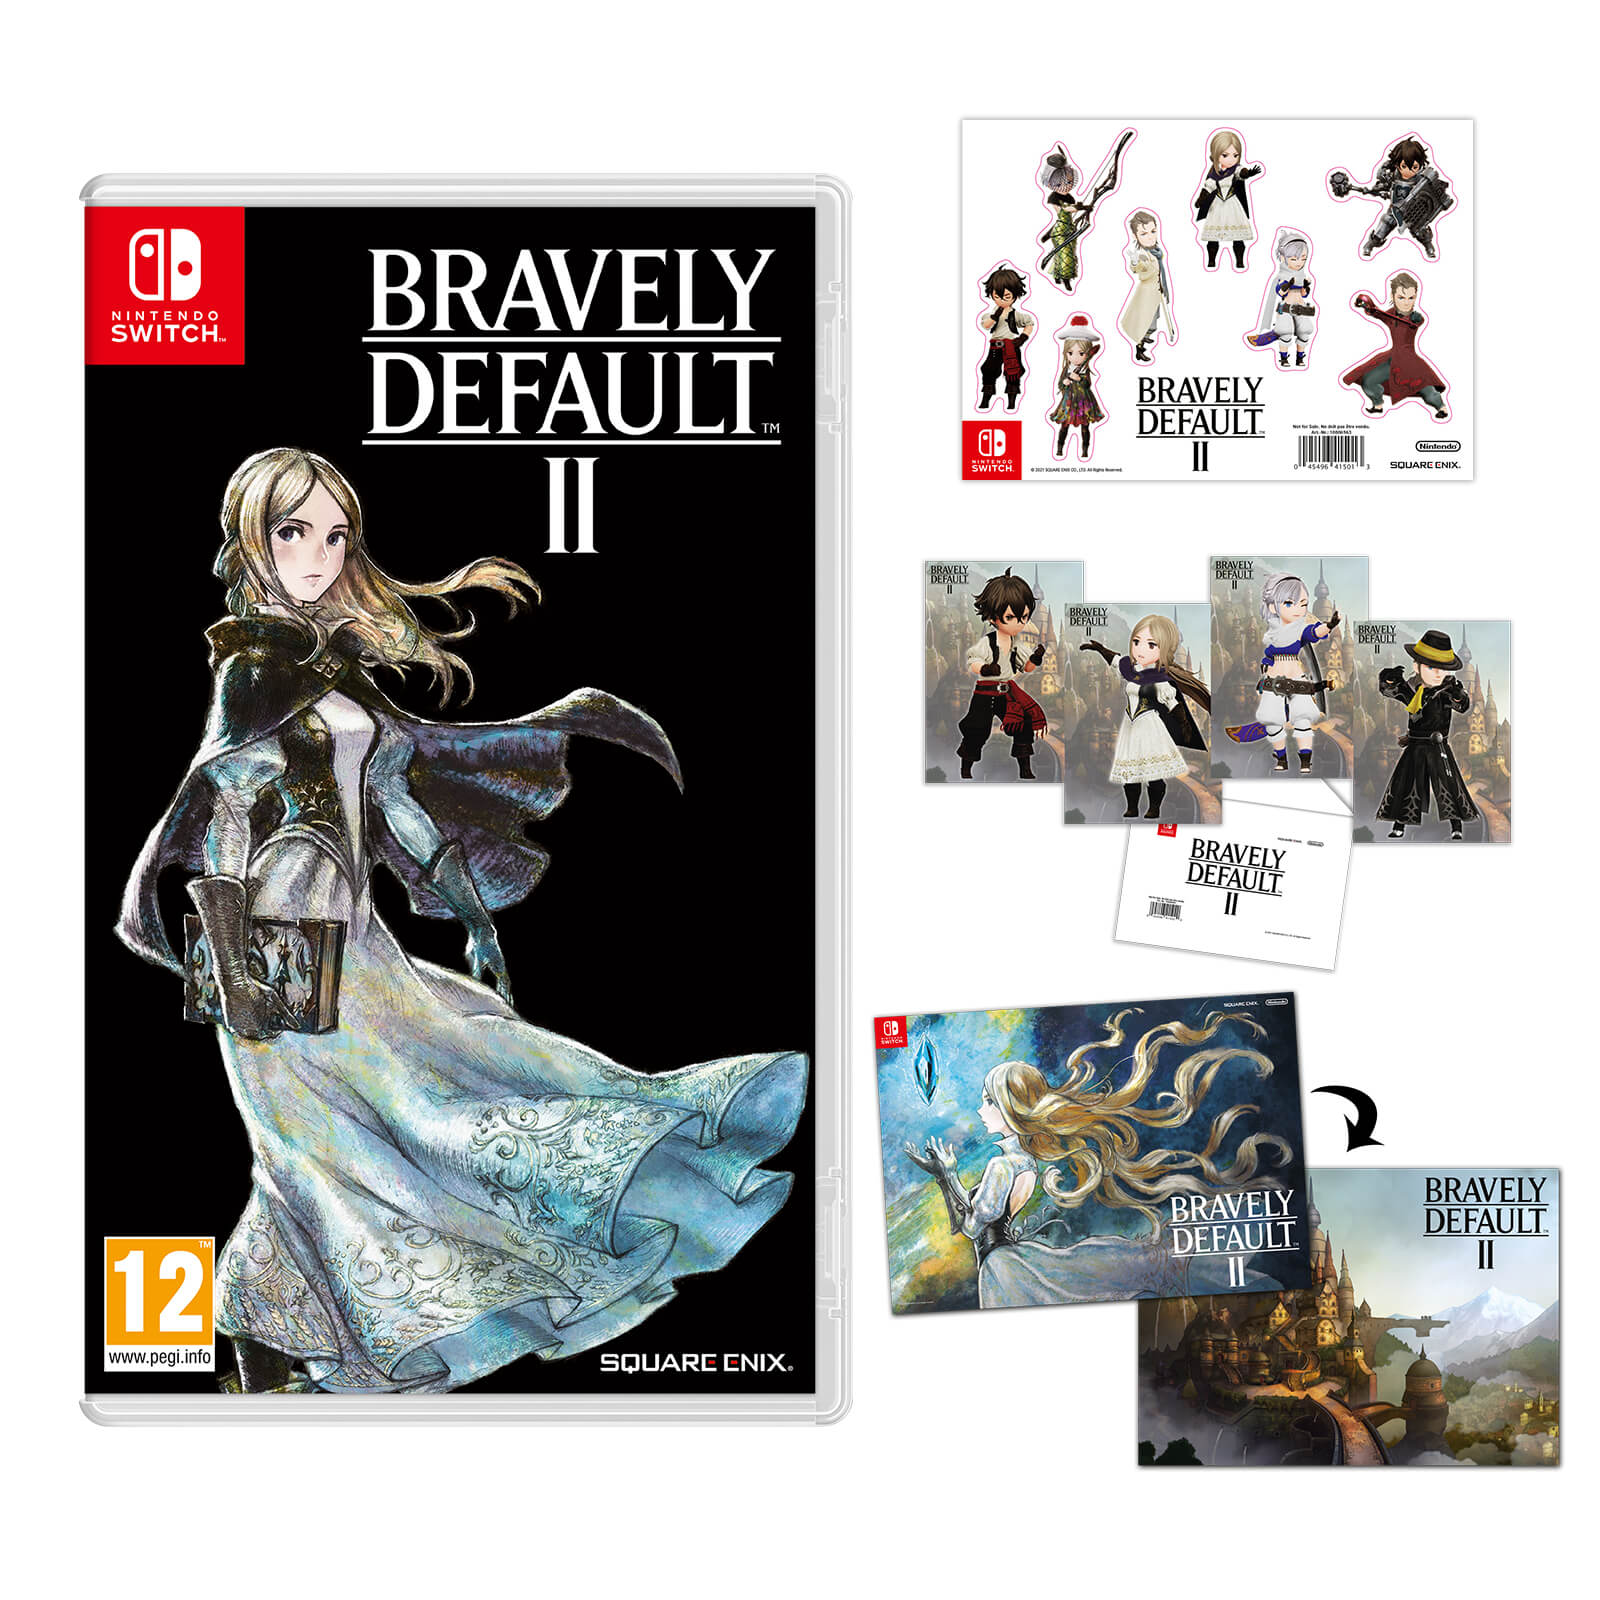 Pre-order Bravely Default II on the Nintendo UK store, get a sticker sheet,  postcard set, and A2 double-sided poster